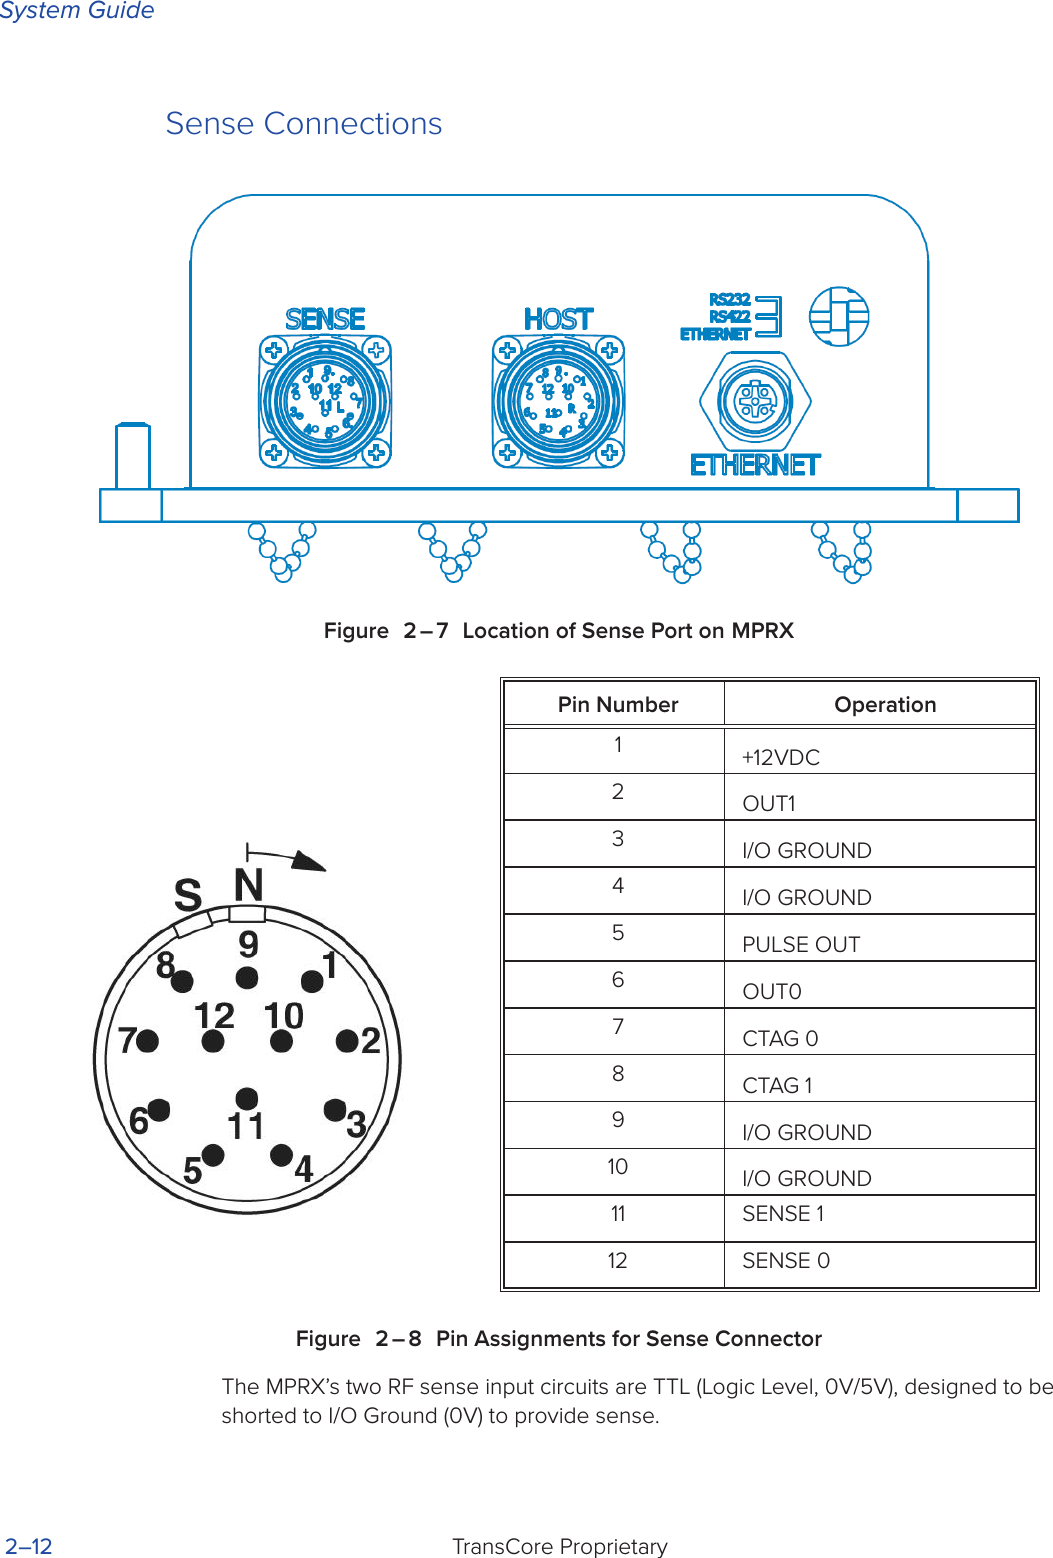 System GuideTransCore Proprietary 2–12Sense ConnectionsFigure 2 – 7 Location of Sense Port on MPRXFigure 2 – 8 Pin Assignments for Sense ConnectorThe MPRX’s two RF sense input circuits are TTL (Logic Level, 0V/5V), designed to be shorted to I/O Ground (0V) to provide sense. Pin Number Operation1+12VDC2OUT13I/O GROUND4I/O GROUND5PULSE OUT6OUT07CTAG 08CTAG 19I/O GROUND10 I/O GROUND11 SENSE 112 SENSE 0